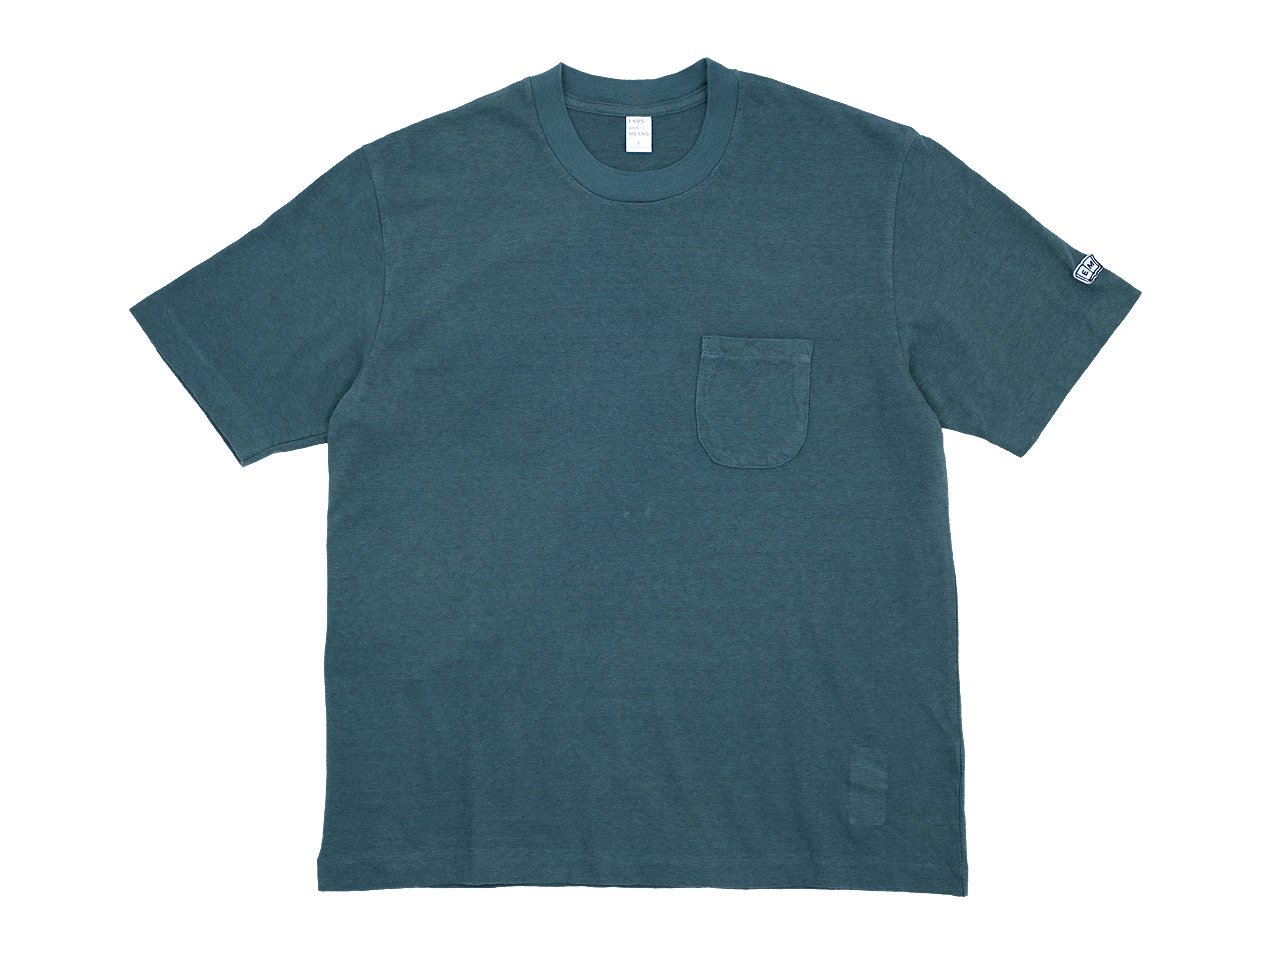 ENDS and MEANS Pocket Tee NAVY GREEN